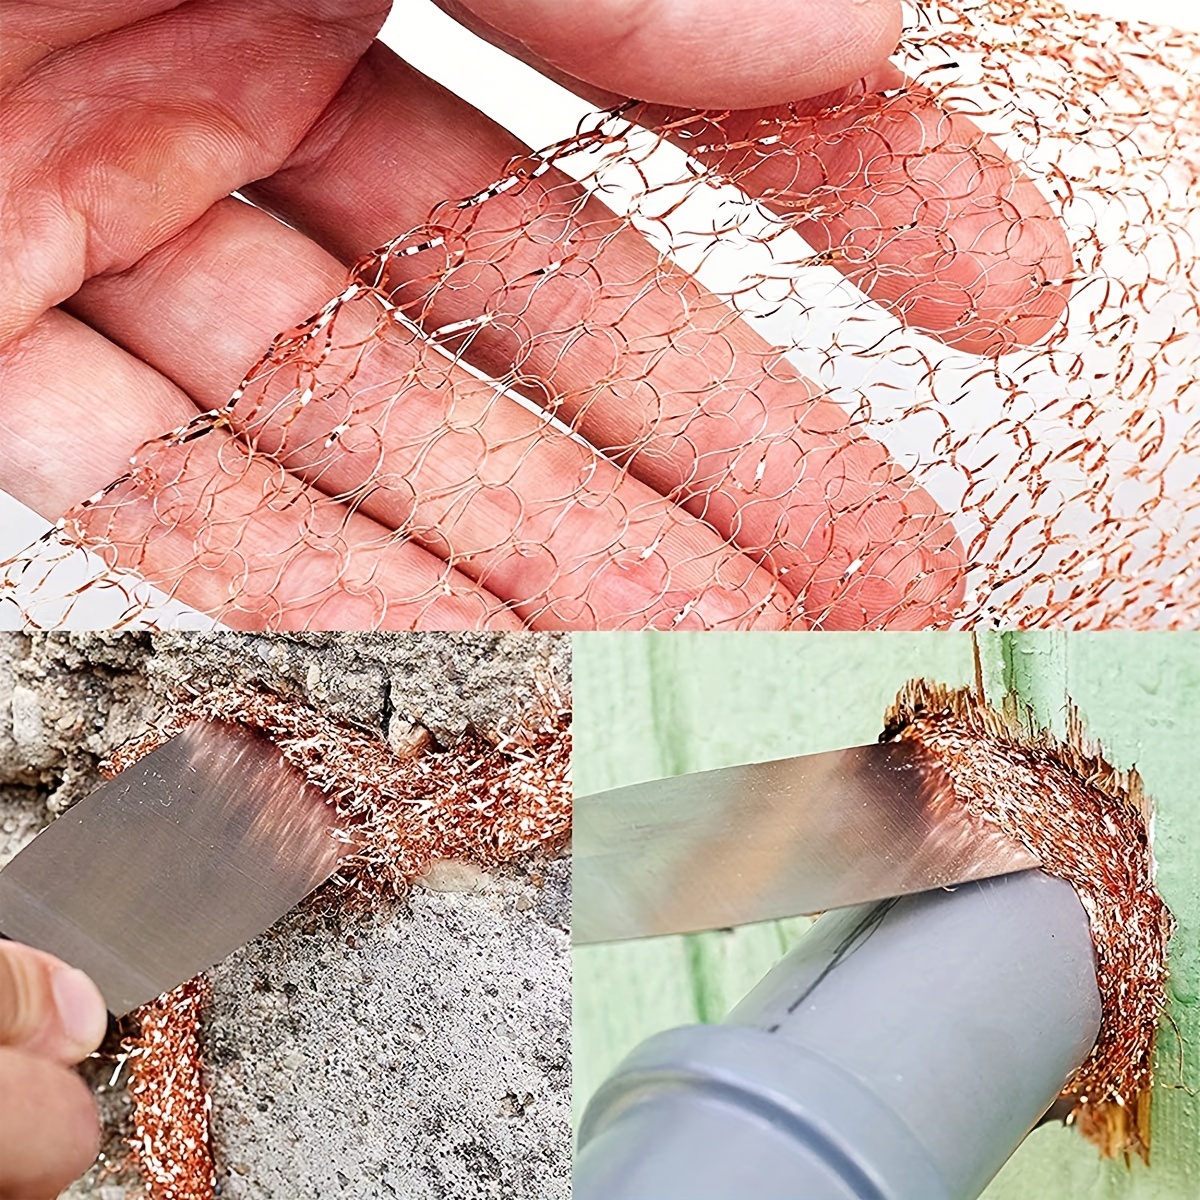 Copper Mesh - 5 X 30 Feet - Blocker for Hole - DIY Hole Filler, Copper  Fill Fabric, Distilling, Pure 100% Copper Roll, with Packing Tool and  Scissors